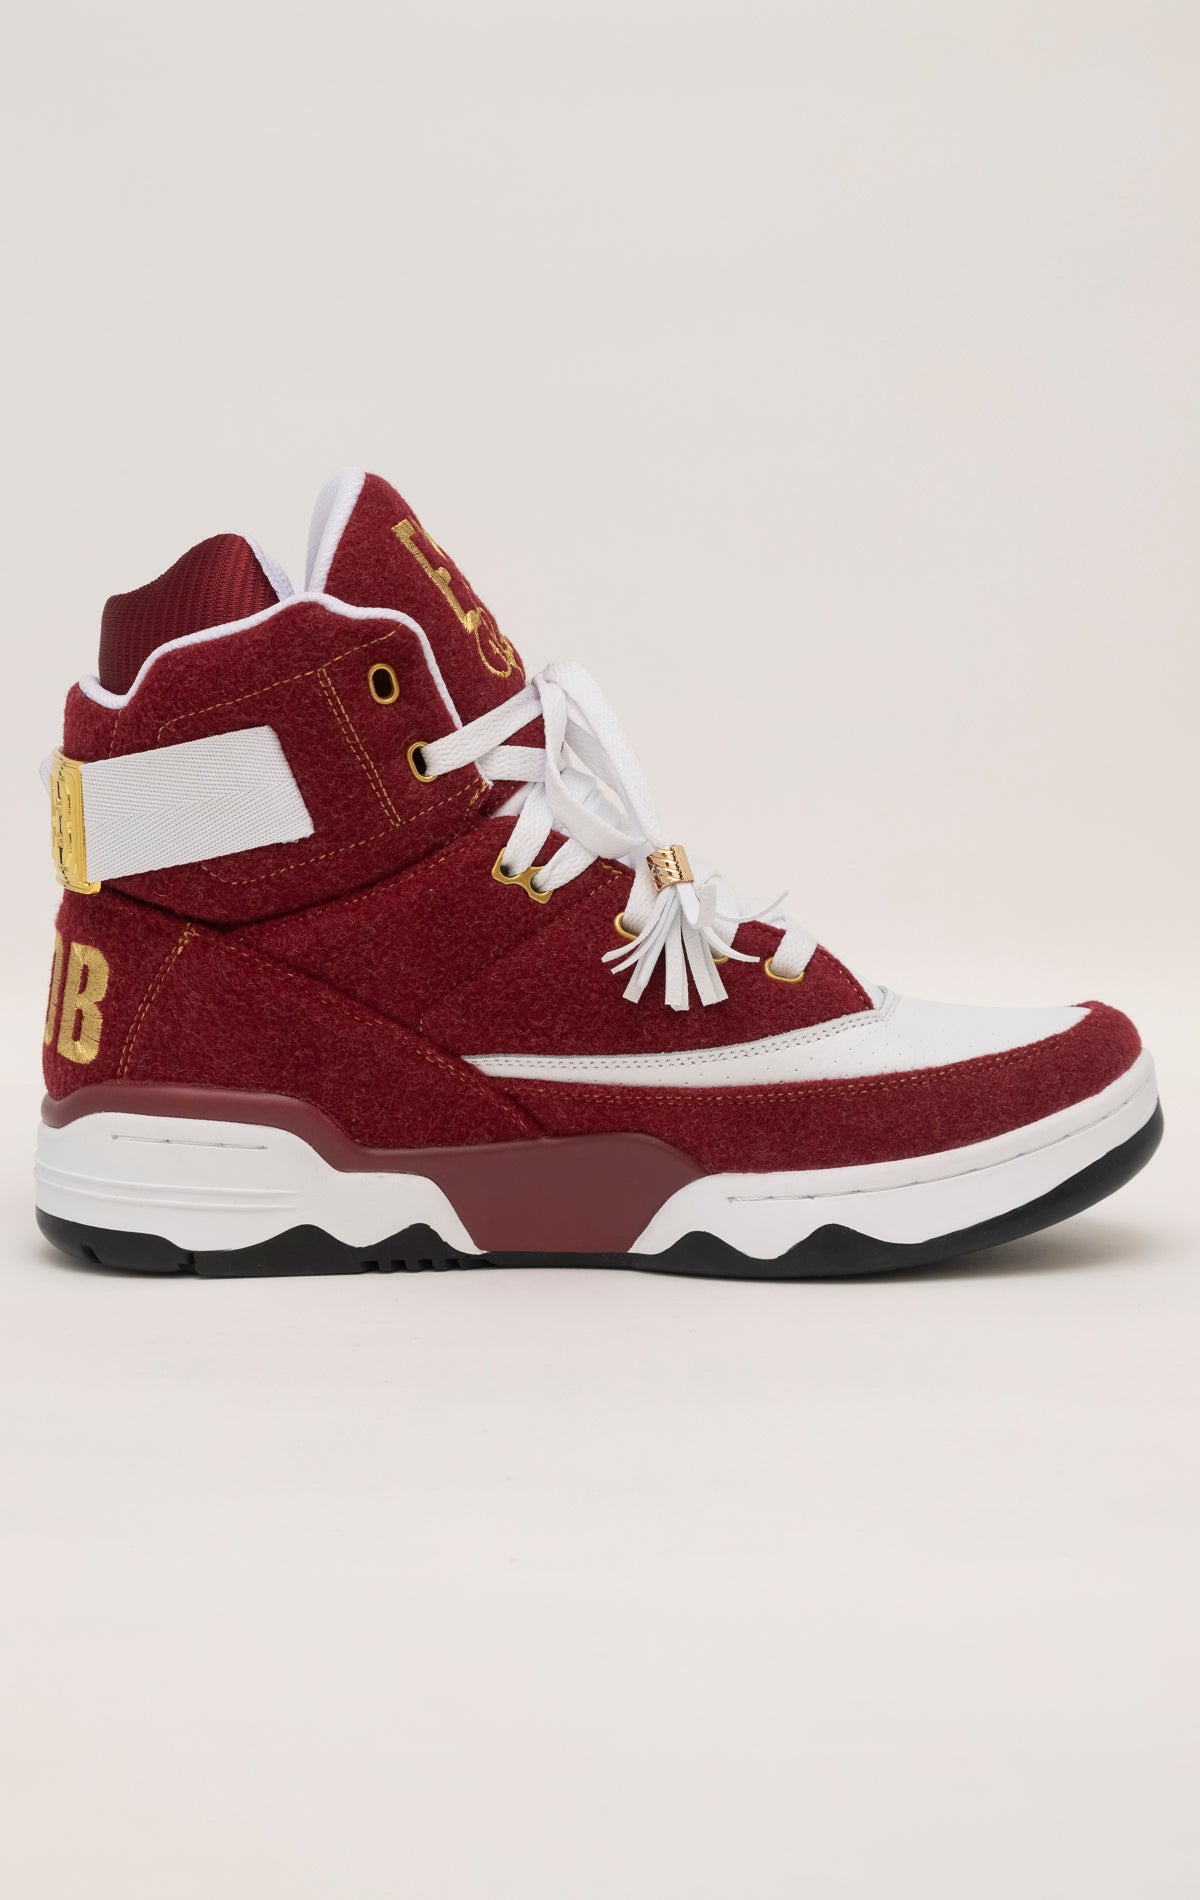 Burgundy and white high-top sneakers with gold accents, co-branded by Ewing Athletics and Ol' Dirty Bastard (ODB) of the Wu-Tang Clan.